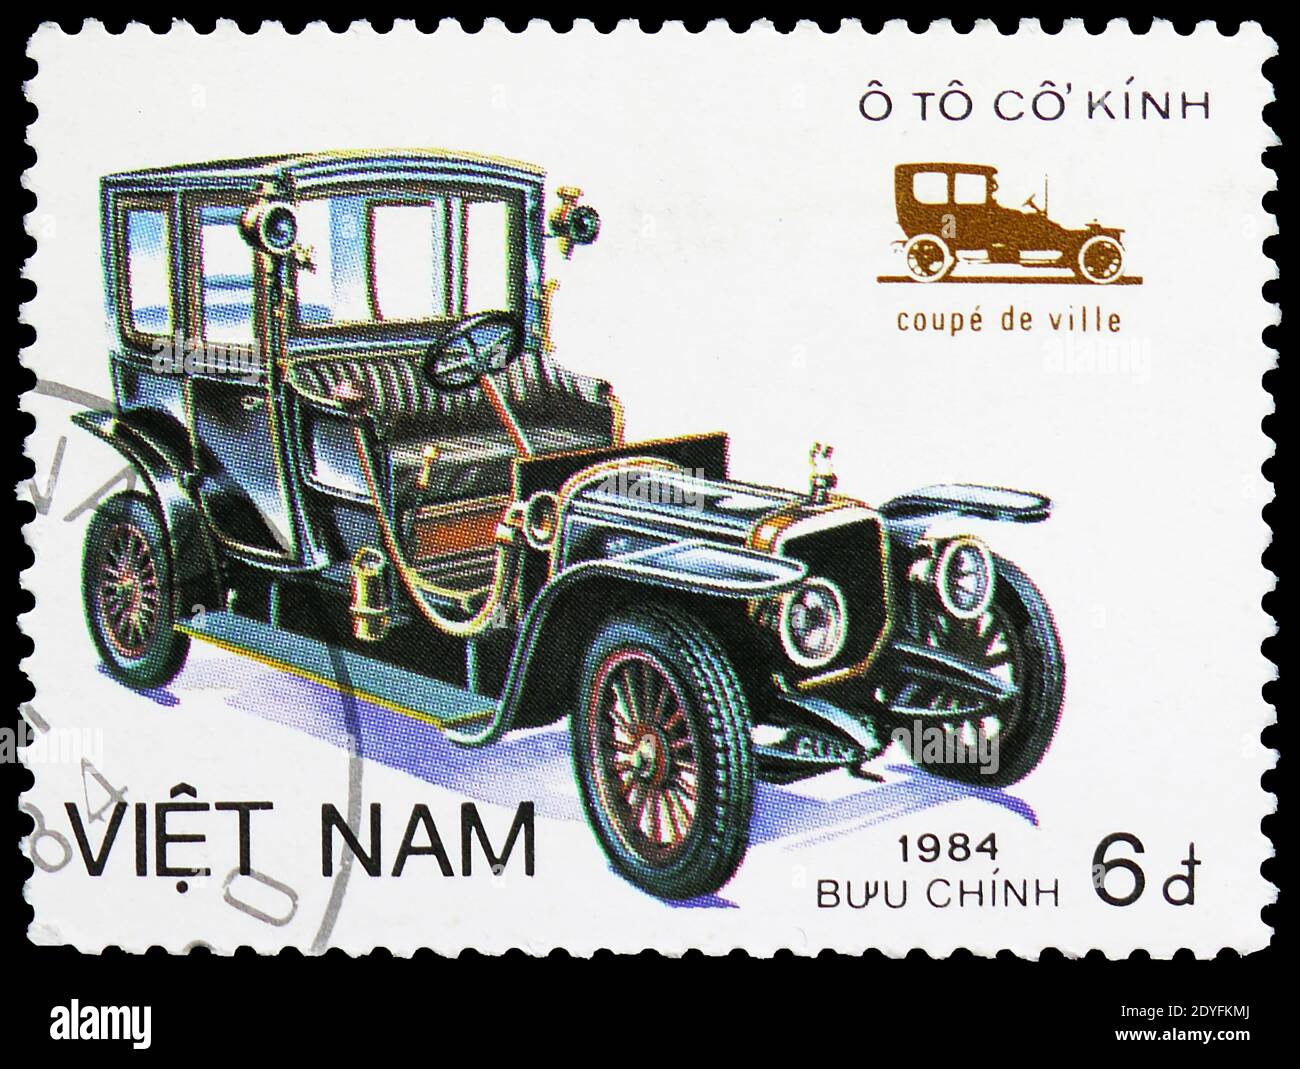 MOSCOW, RUSSIA - MARCH 23, 2019: Postage stamp printed in Vietnam shows Coupe de Ville, Old Automobiles serie, circa 1984 Stock Photo